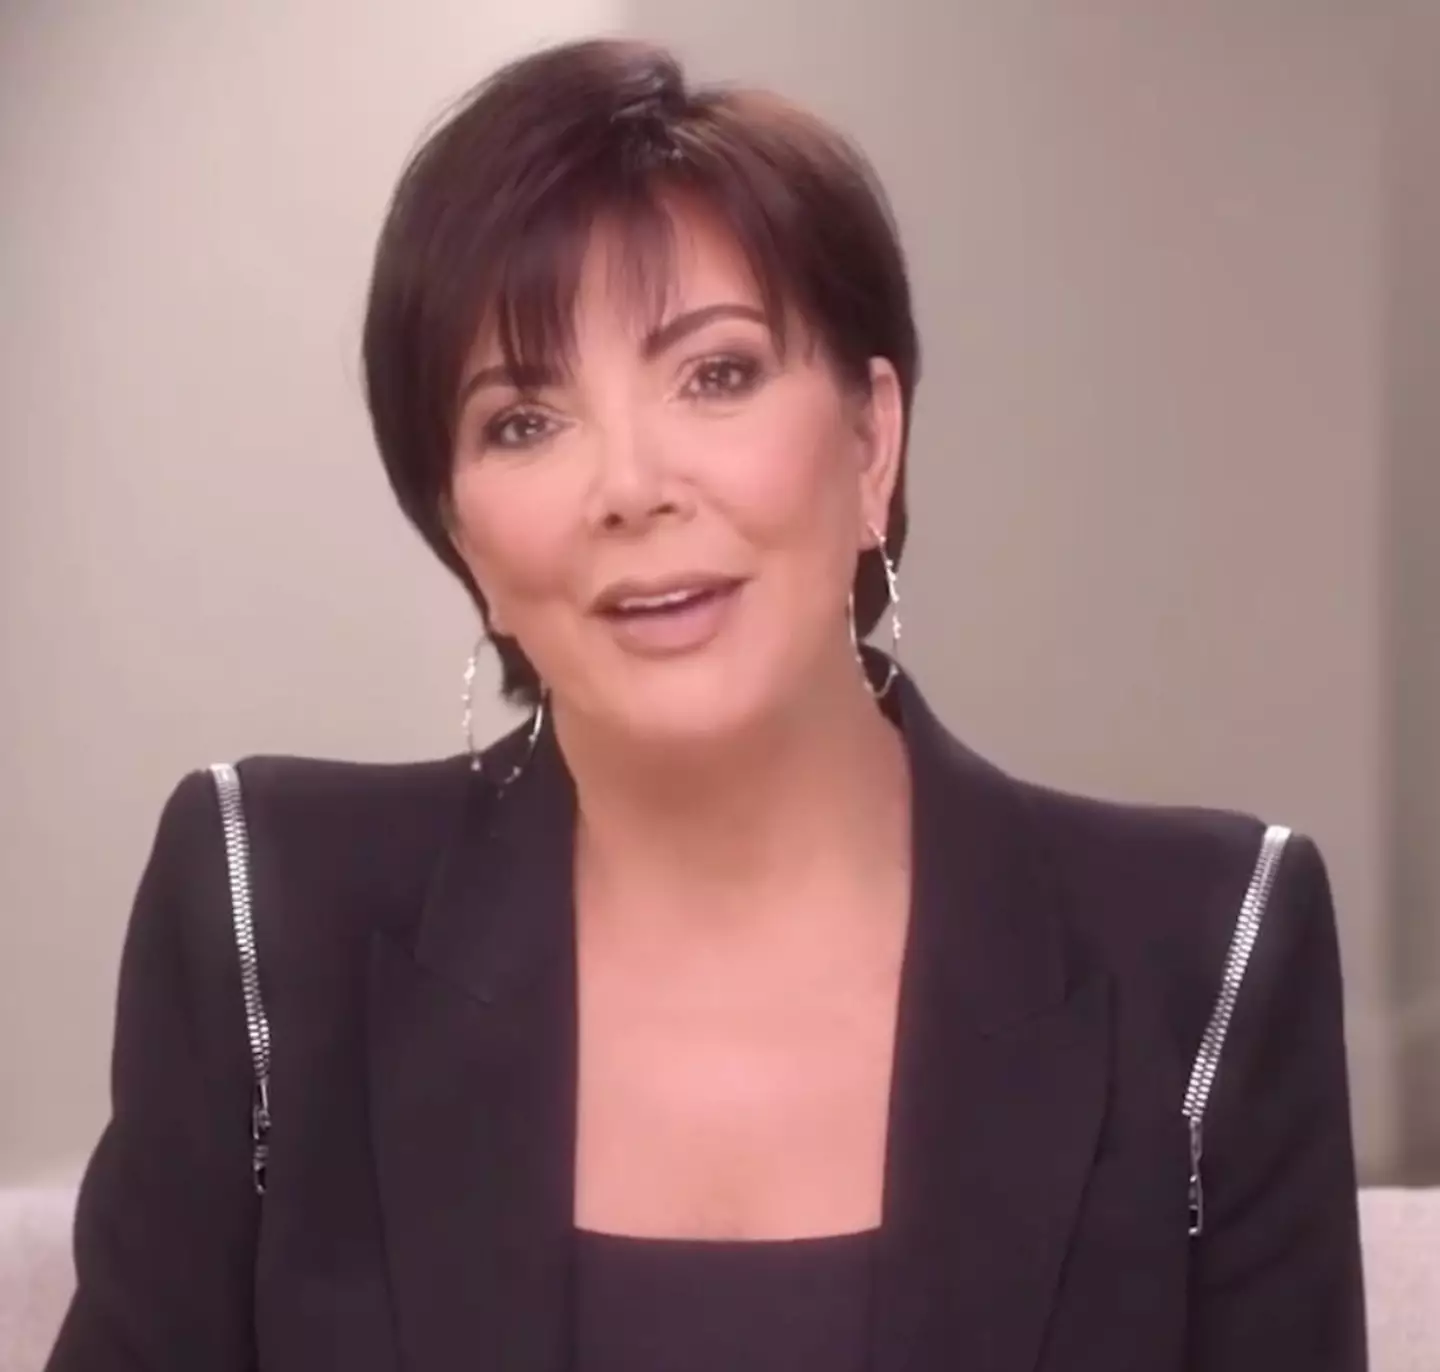 Kris speaks about the wedding in a new episode of The Kardashians.